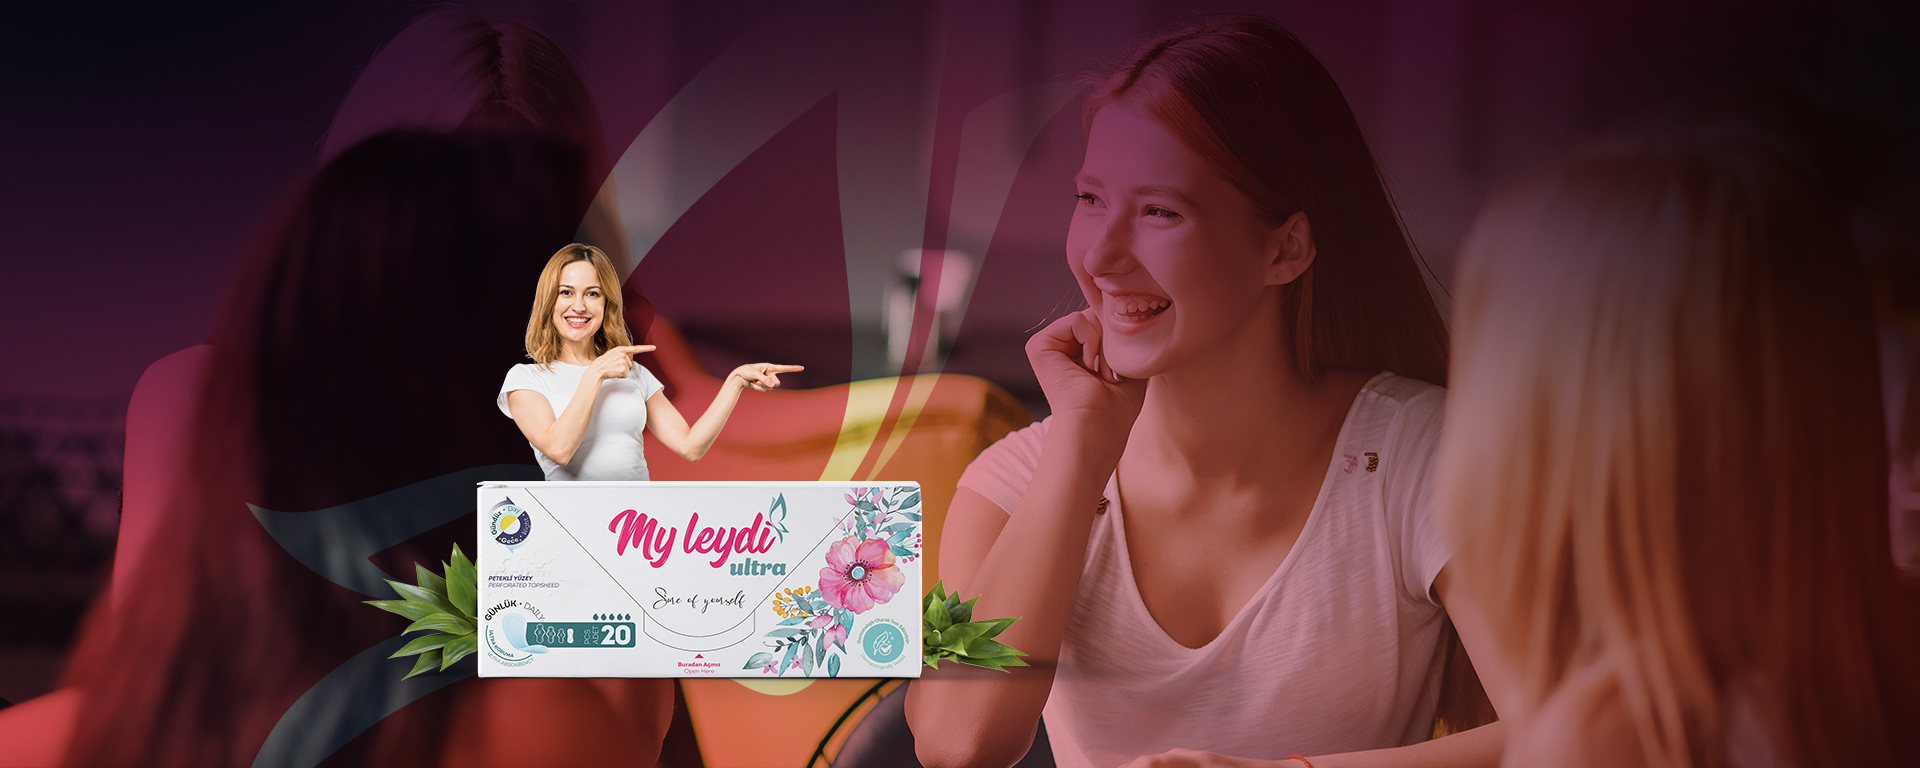 FOR PERFECT PROTECTION IN NATURAL FLOW OF LIFE ,  MYLEYDI ULTRA RECOMENDS MYLEYDI PANTYLINER 